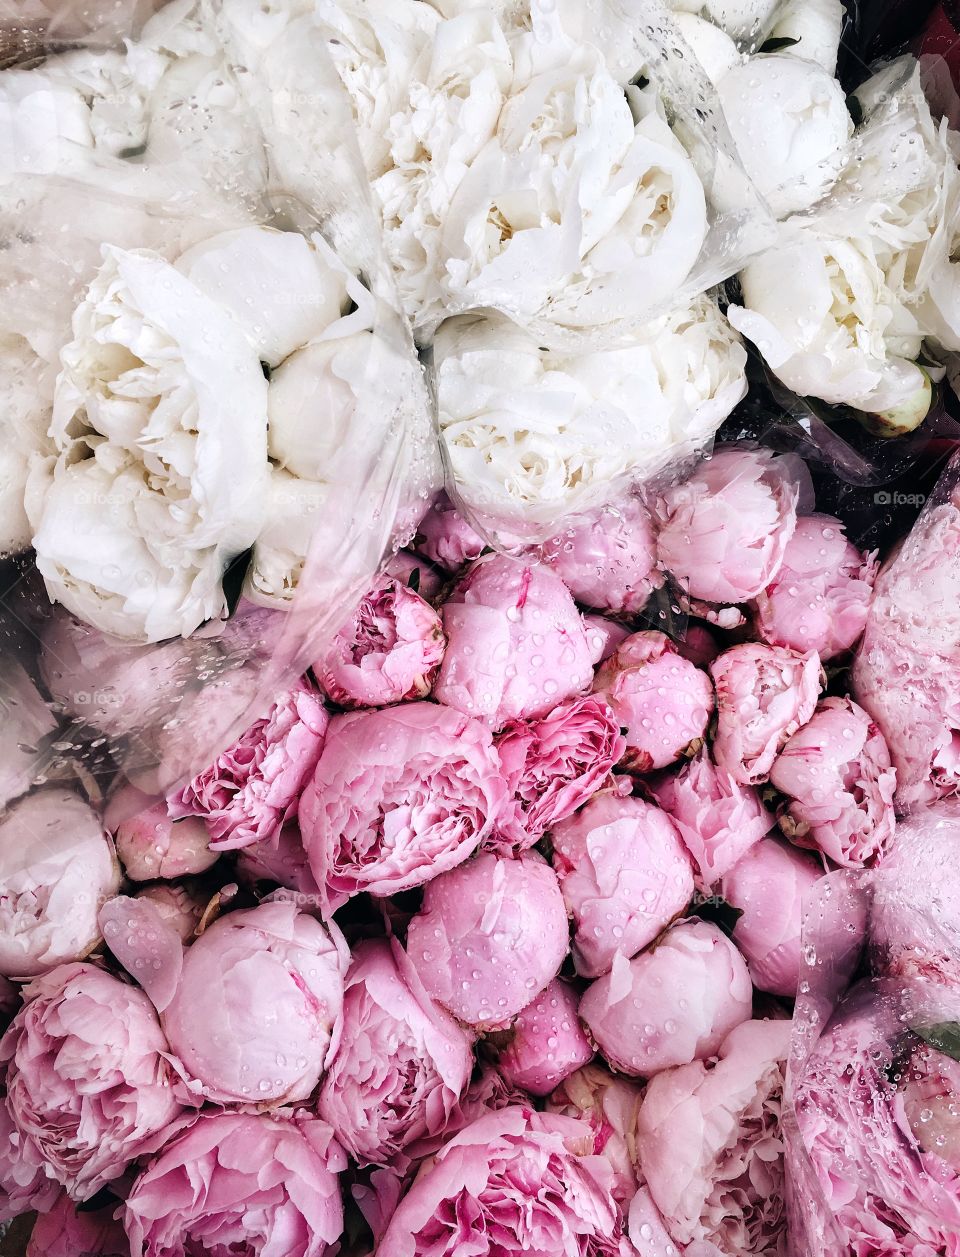 In love with peonies 🌈